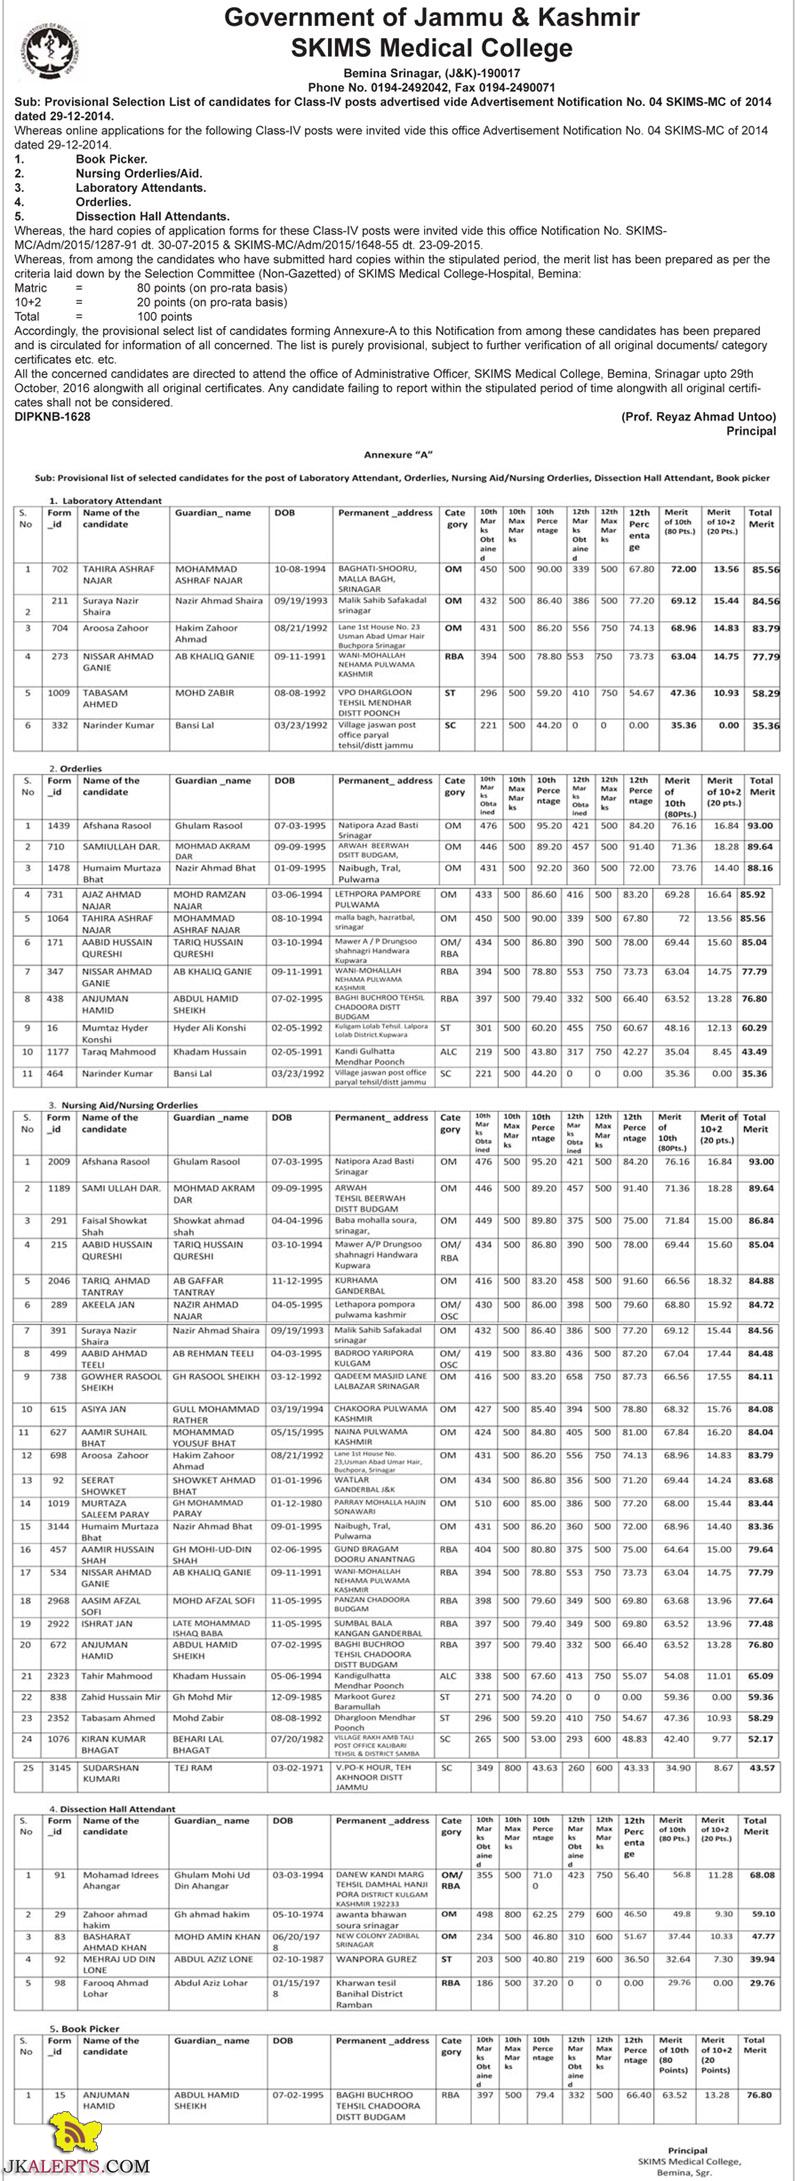 SKIMS Medical College Provisional Selection list for Class-IV posts